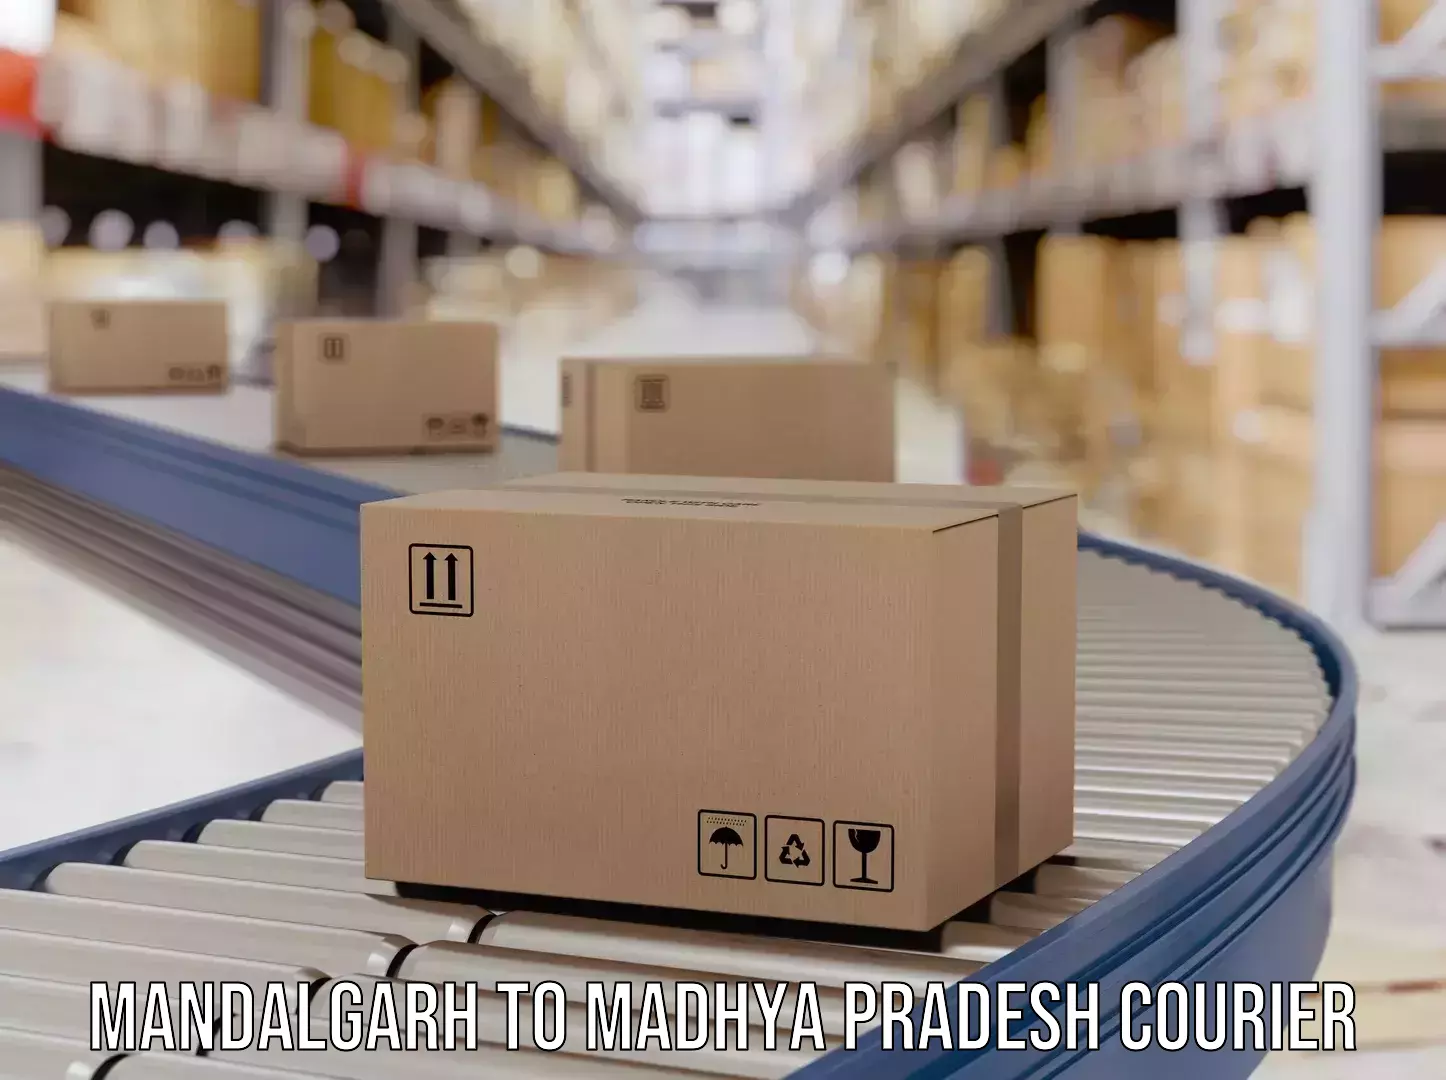 State-of-the-art courier technology Mandalgarh to Raipur Karchuliyan